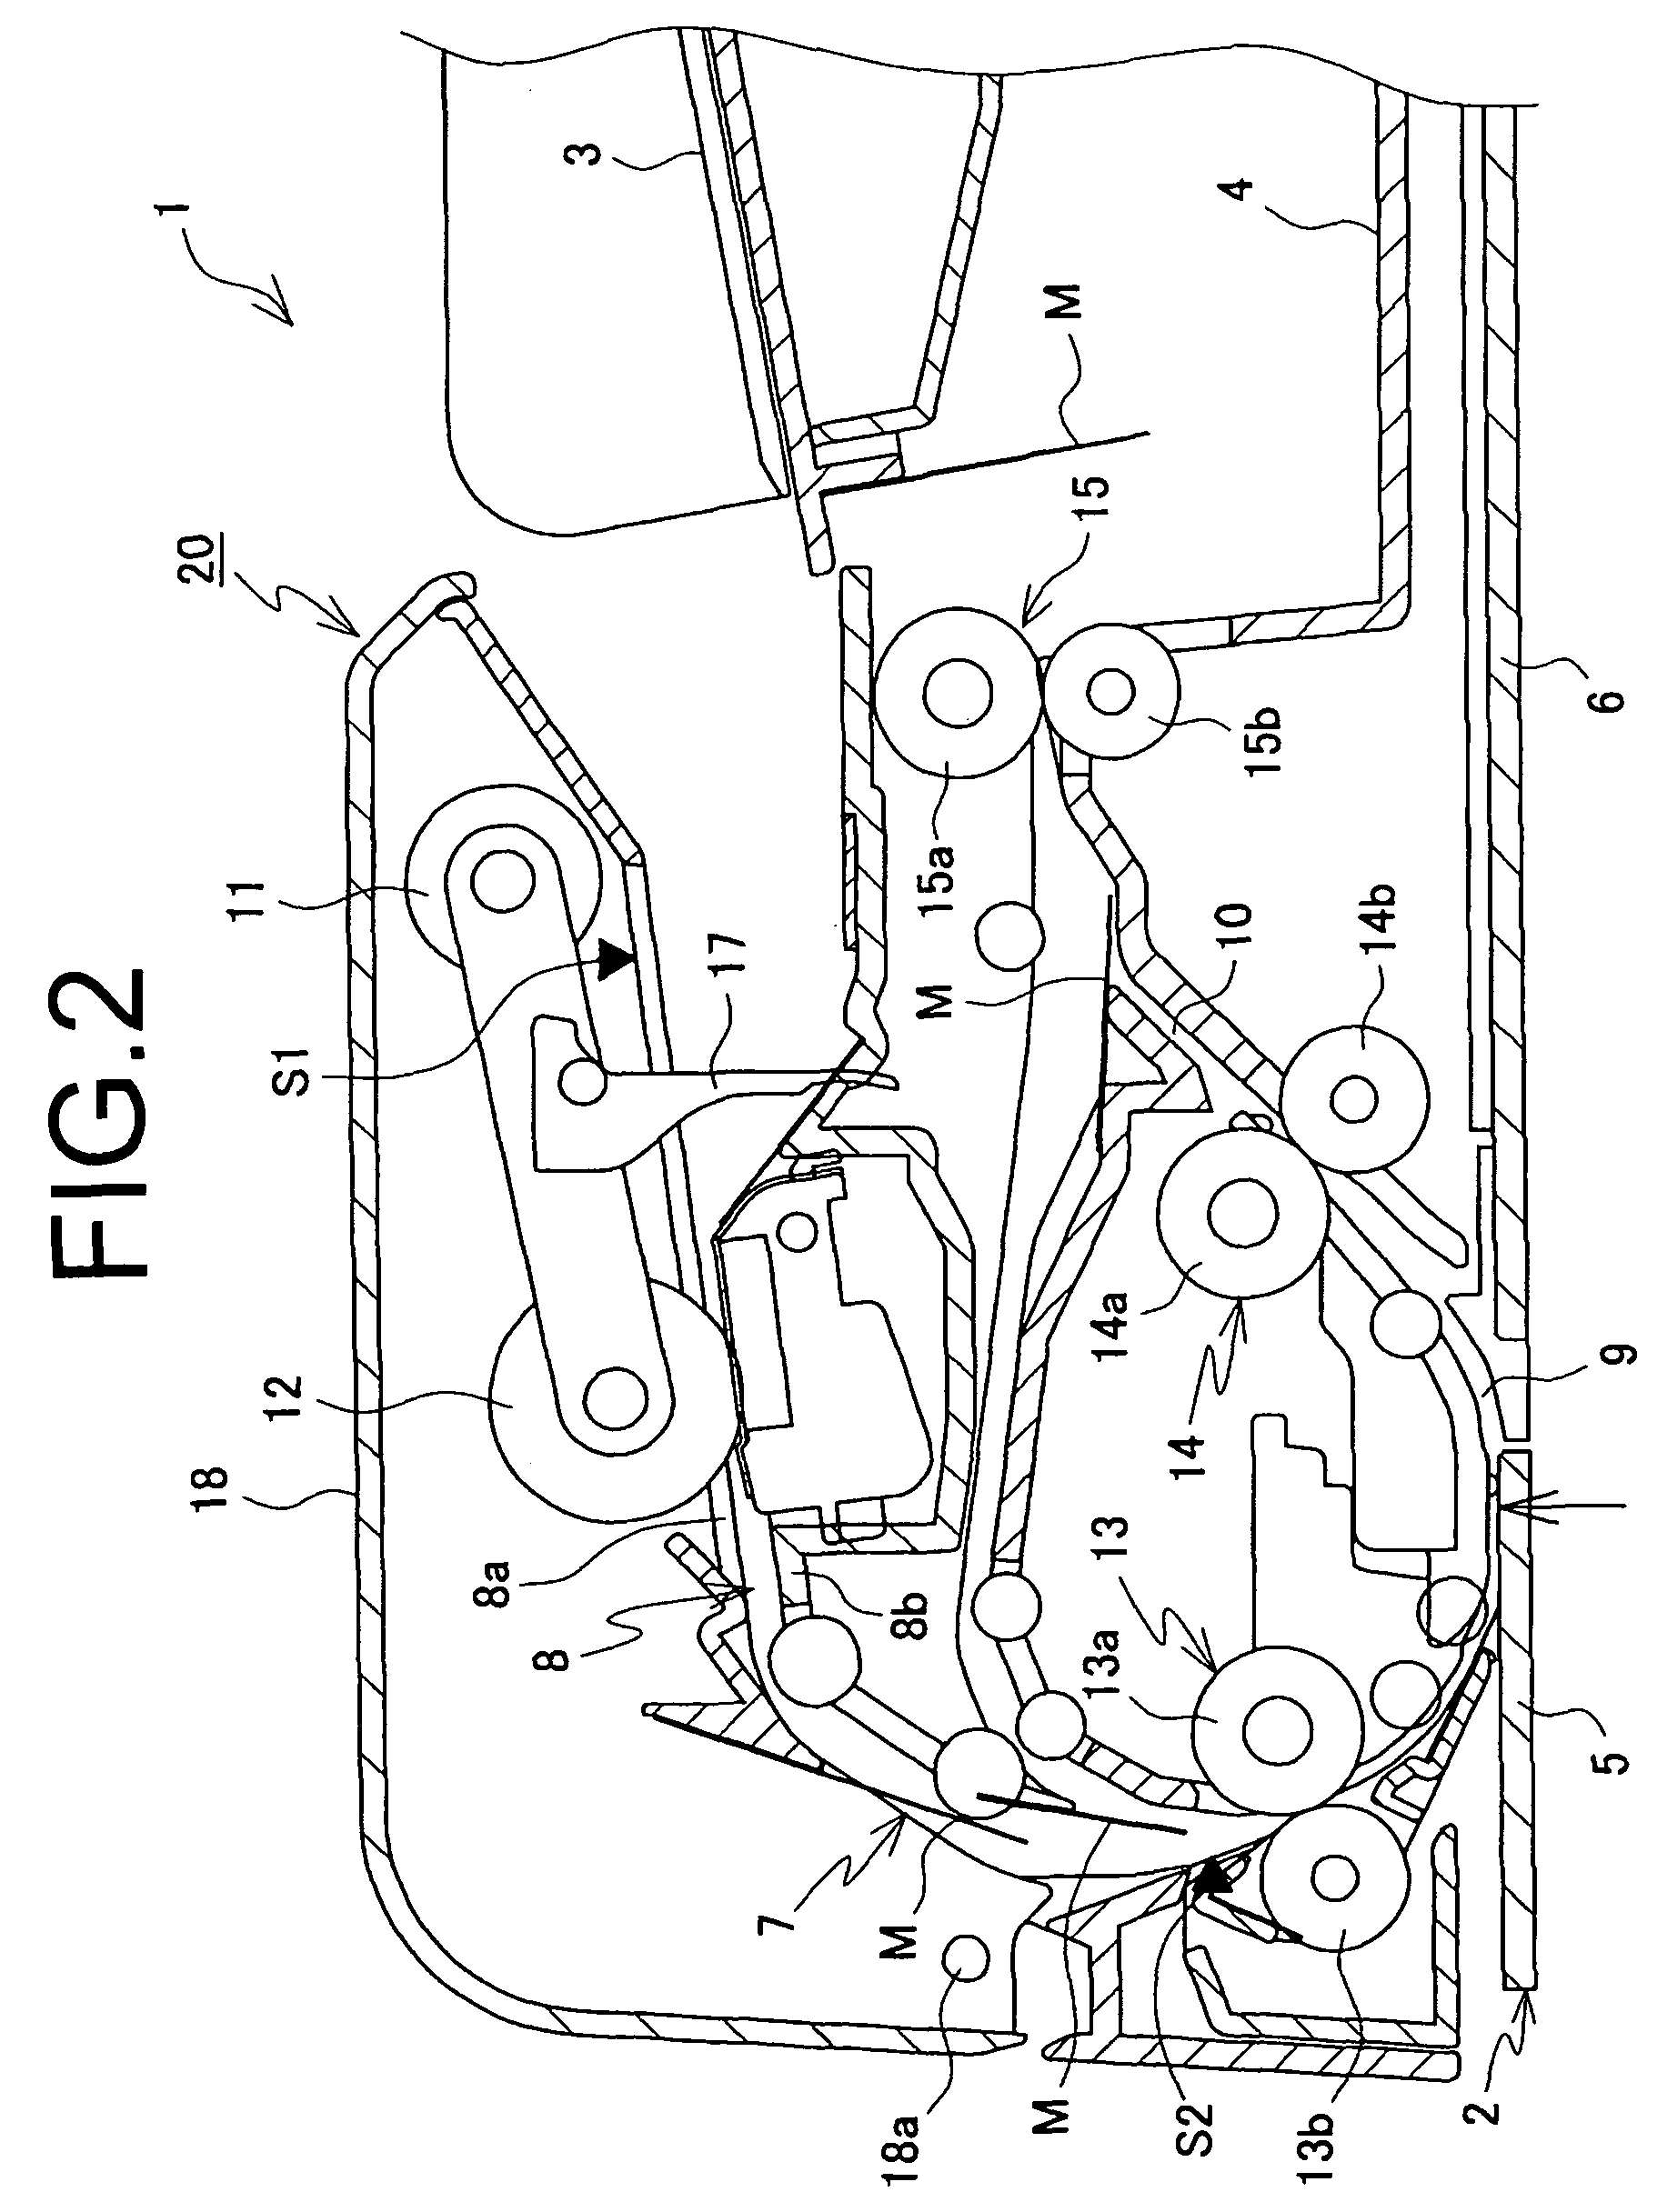 Sheet transport apparatus with jam clearing dial